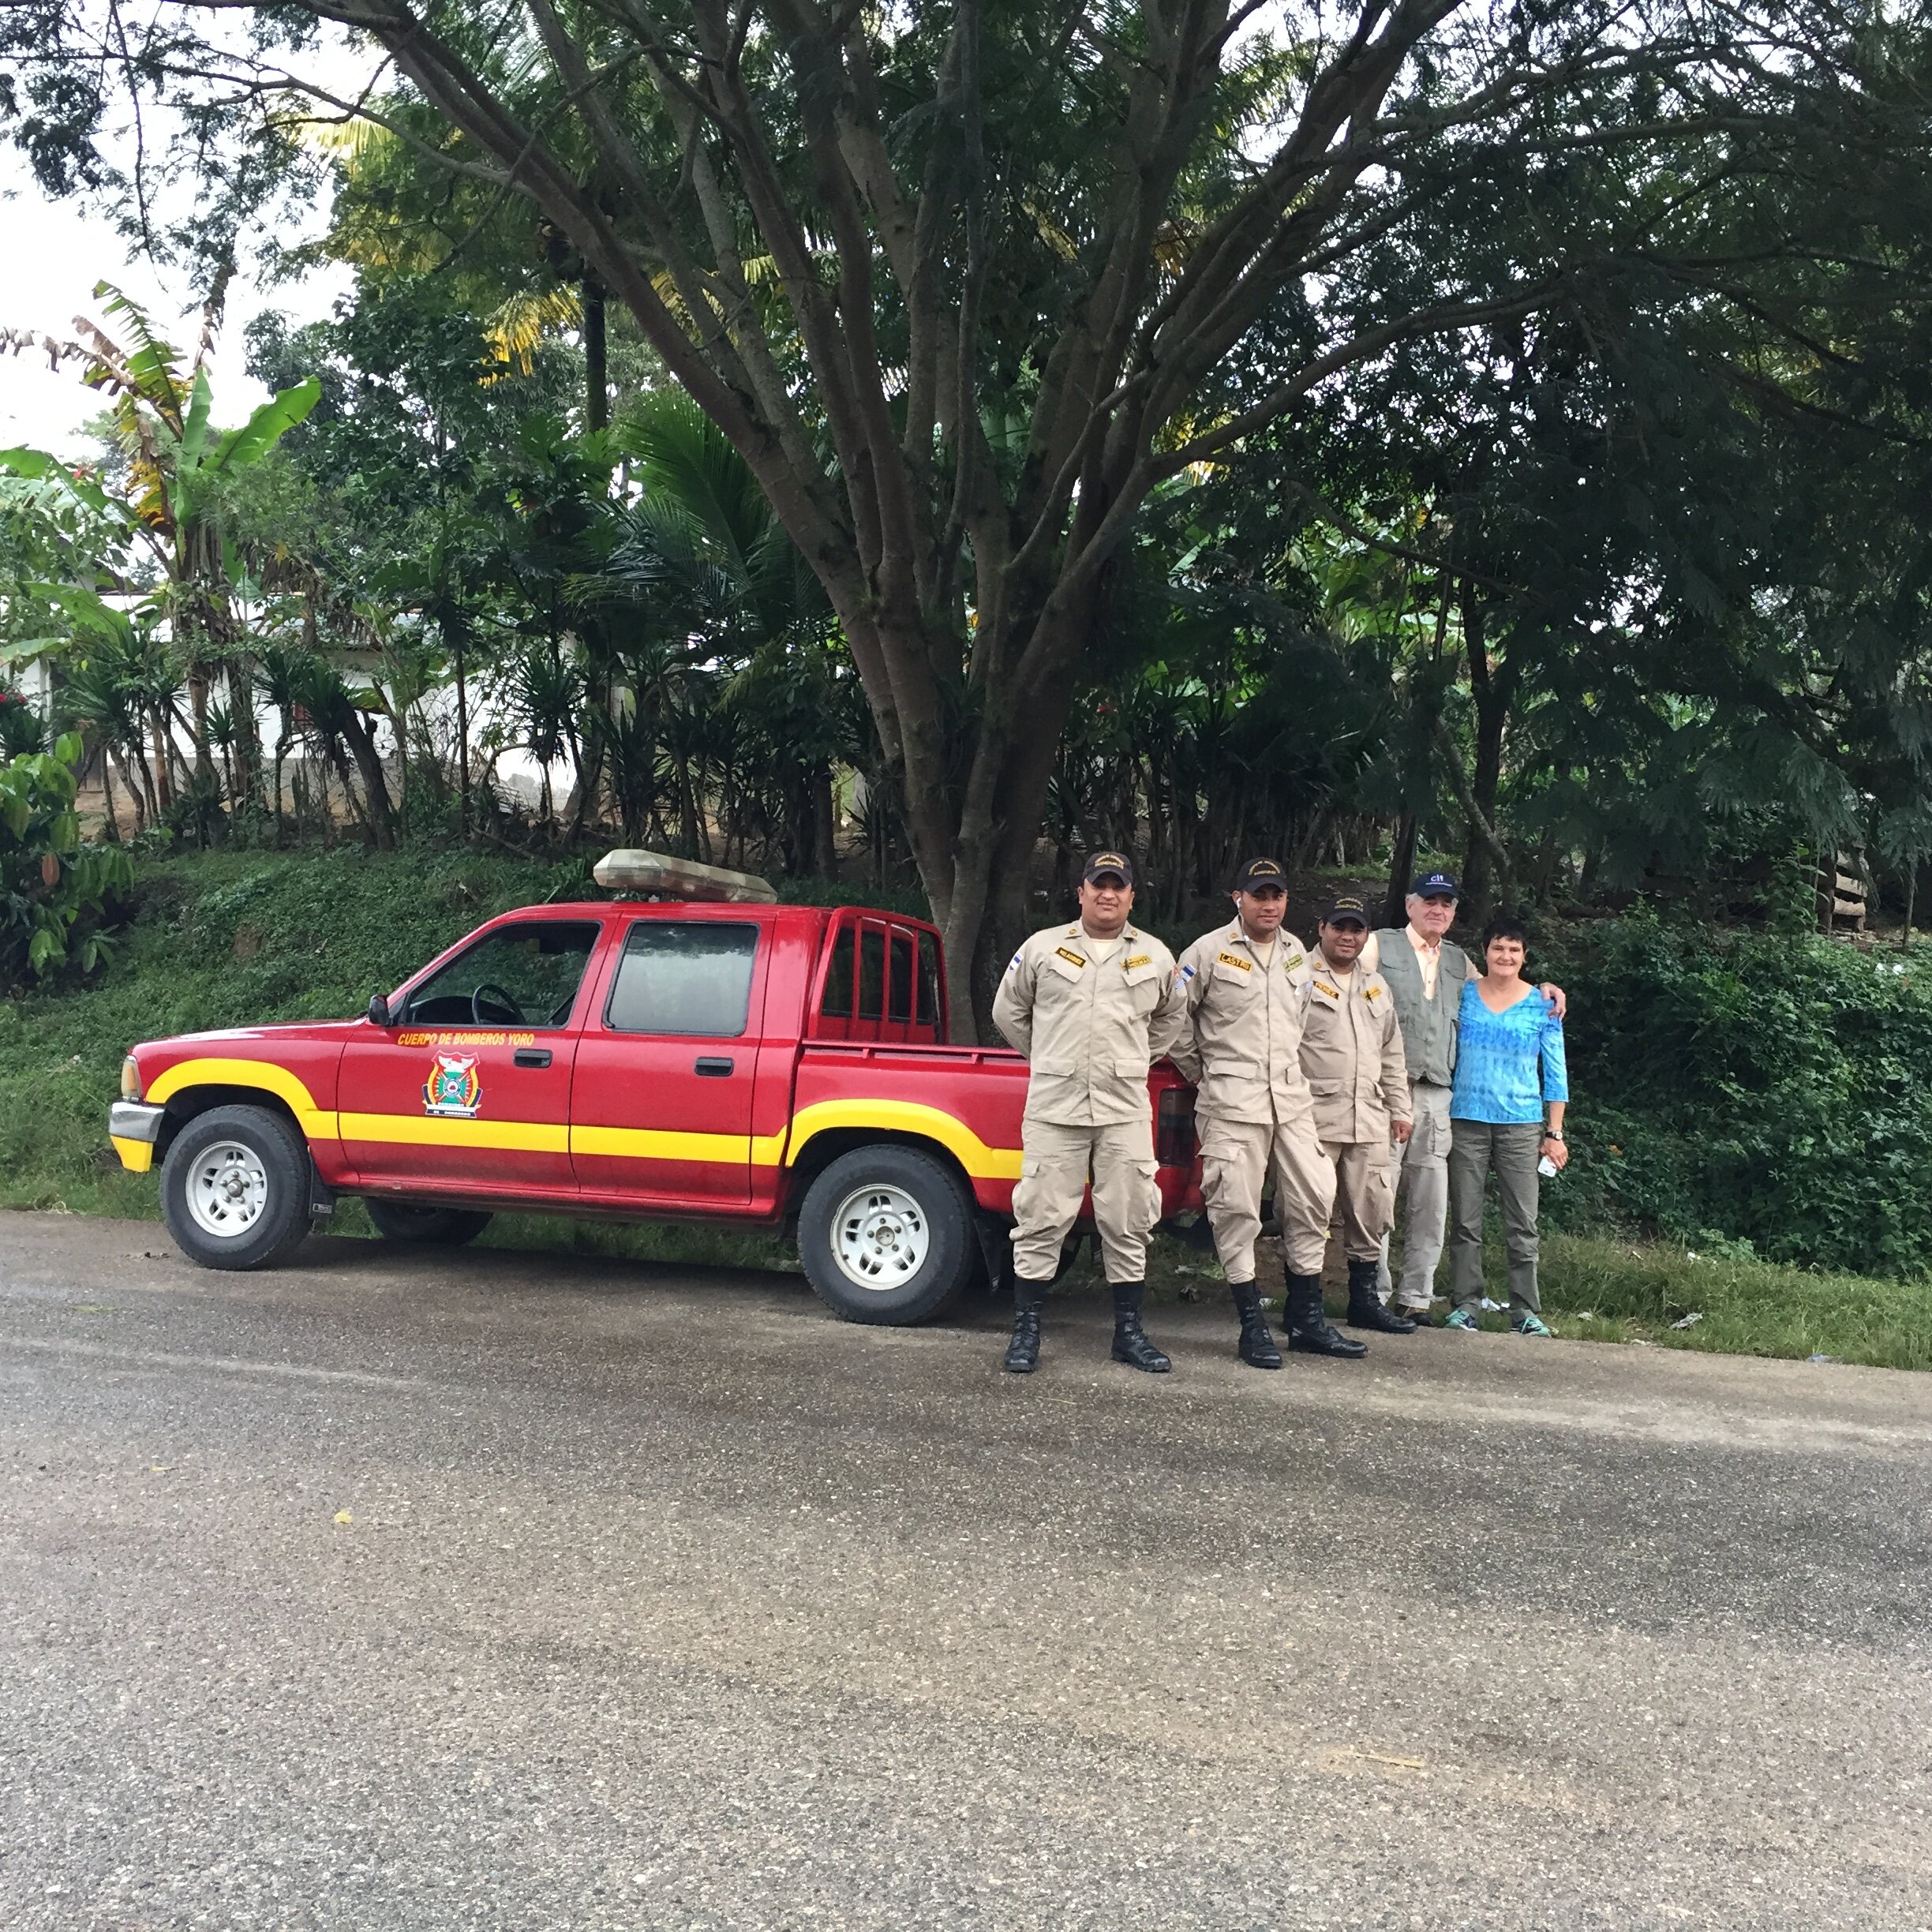 Members of the Yoro Fire Department met the team in San Pedro Sula to pick up donated fire equipment.